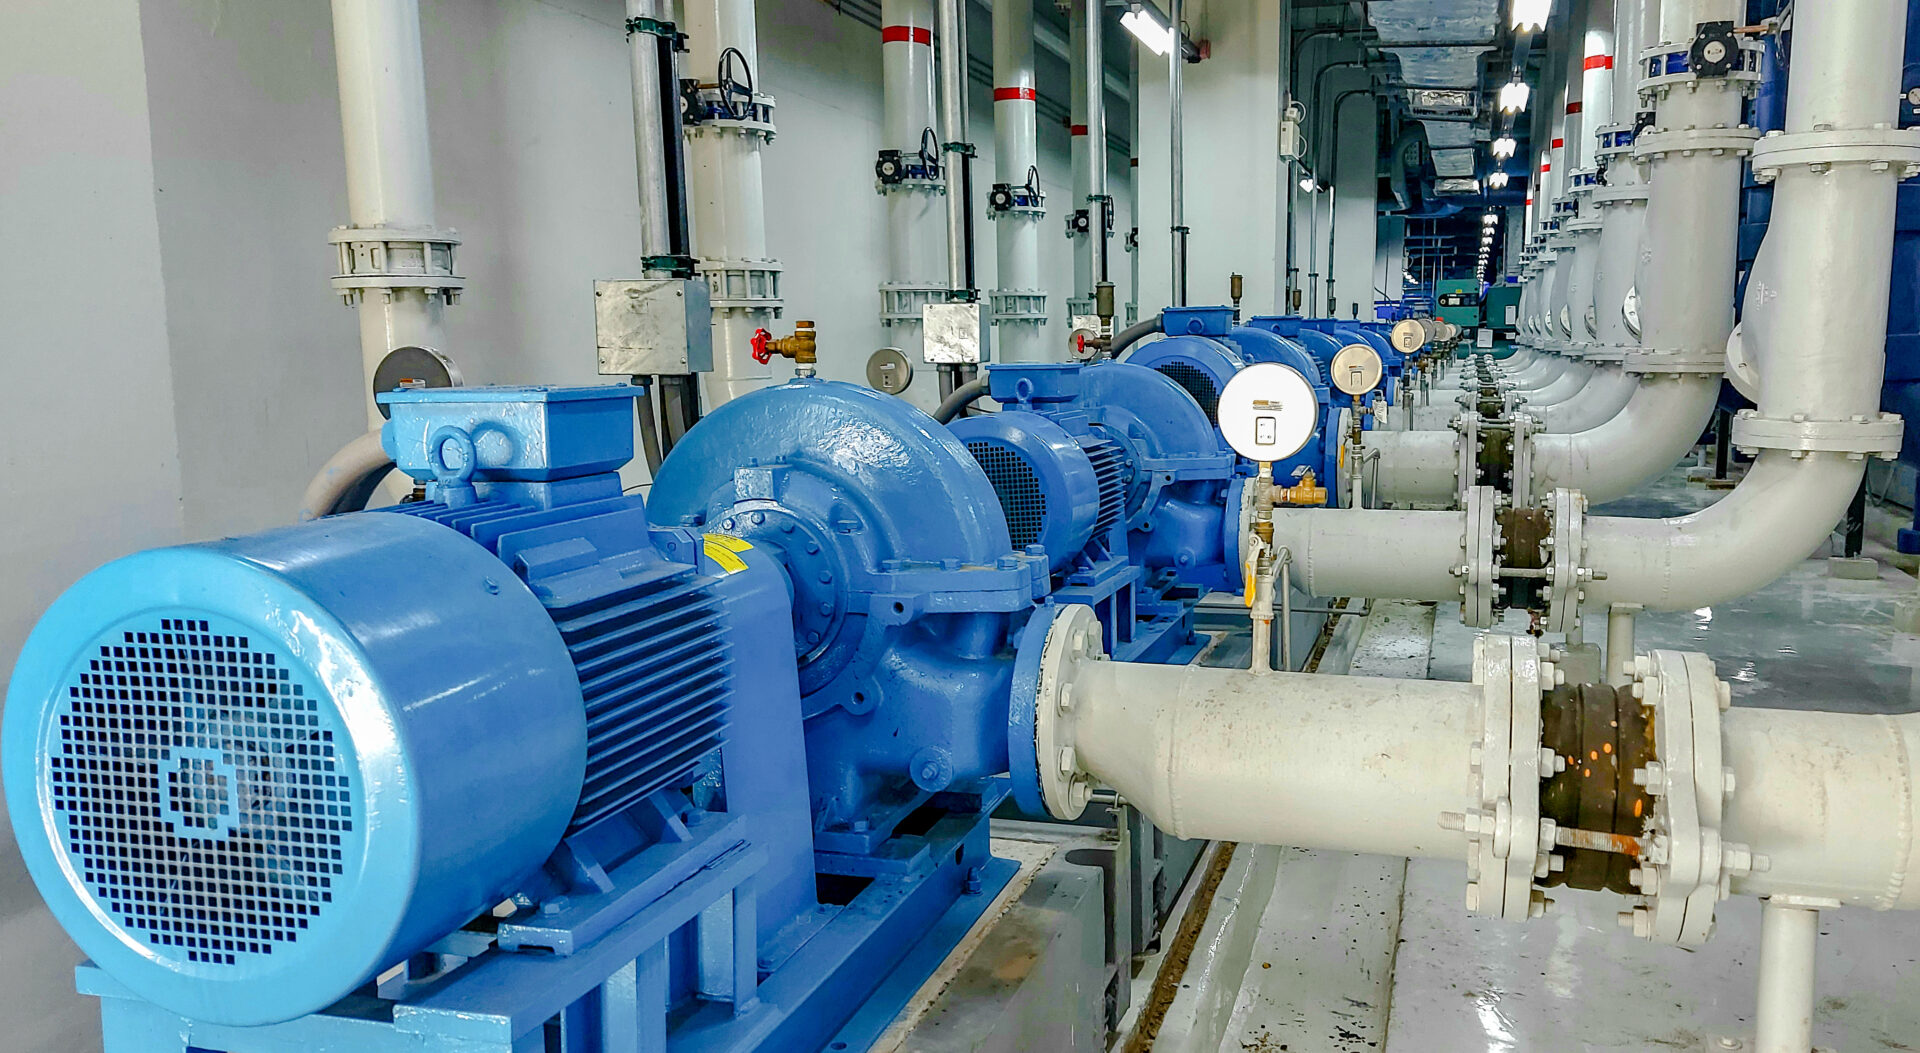 A large industrial machine room with many blue pumps.